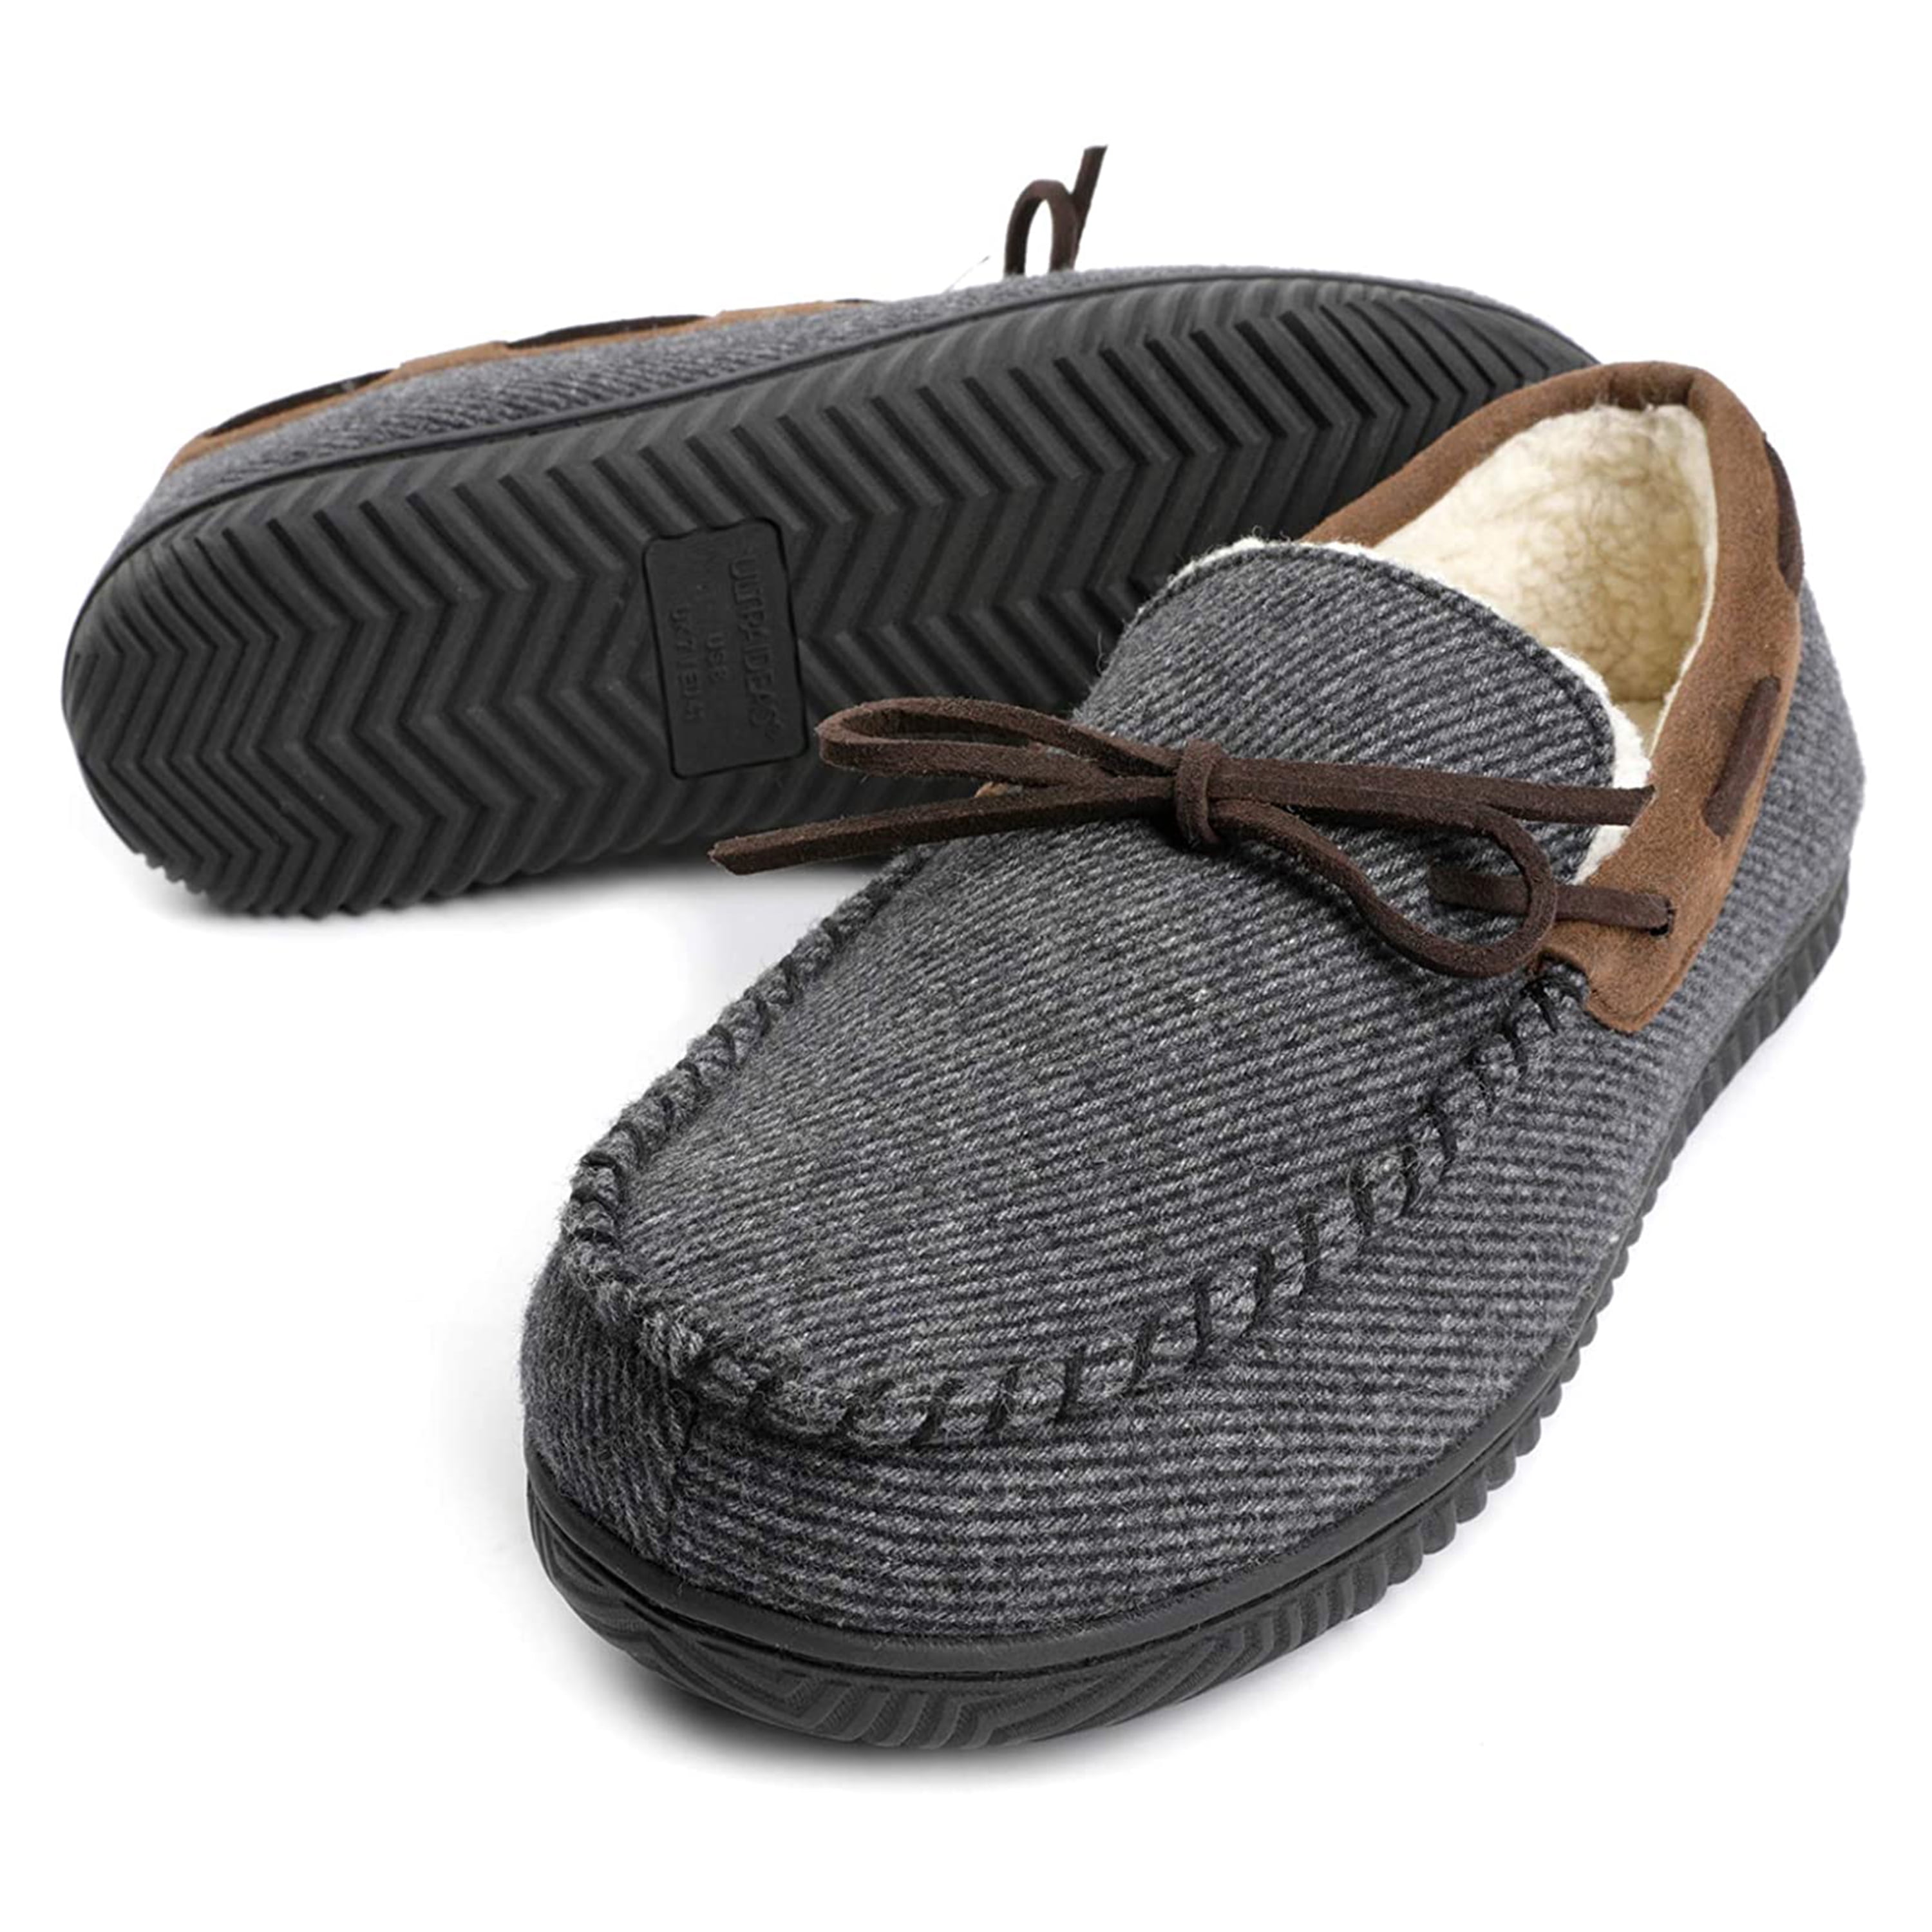 MERRIMAC Men's Breathable Moccasin Slippers with Removable Insole